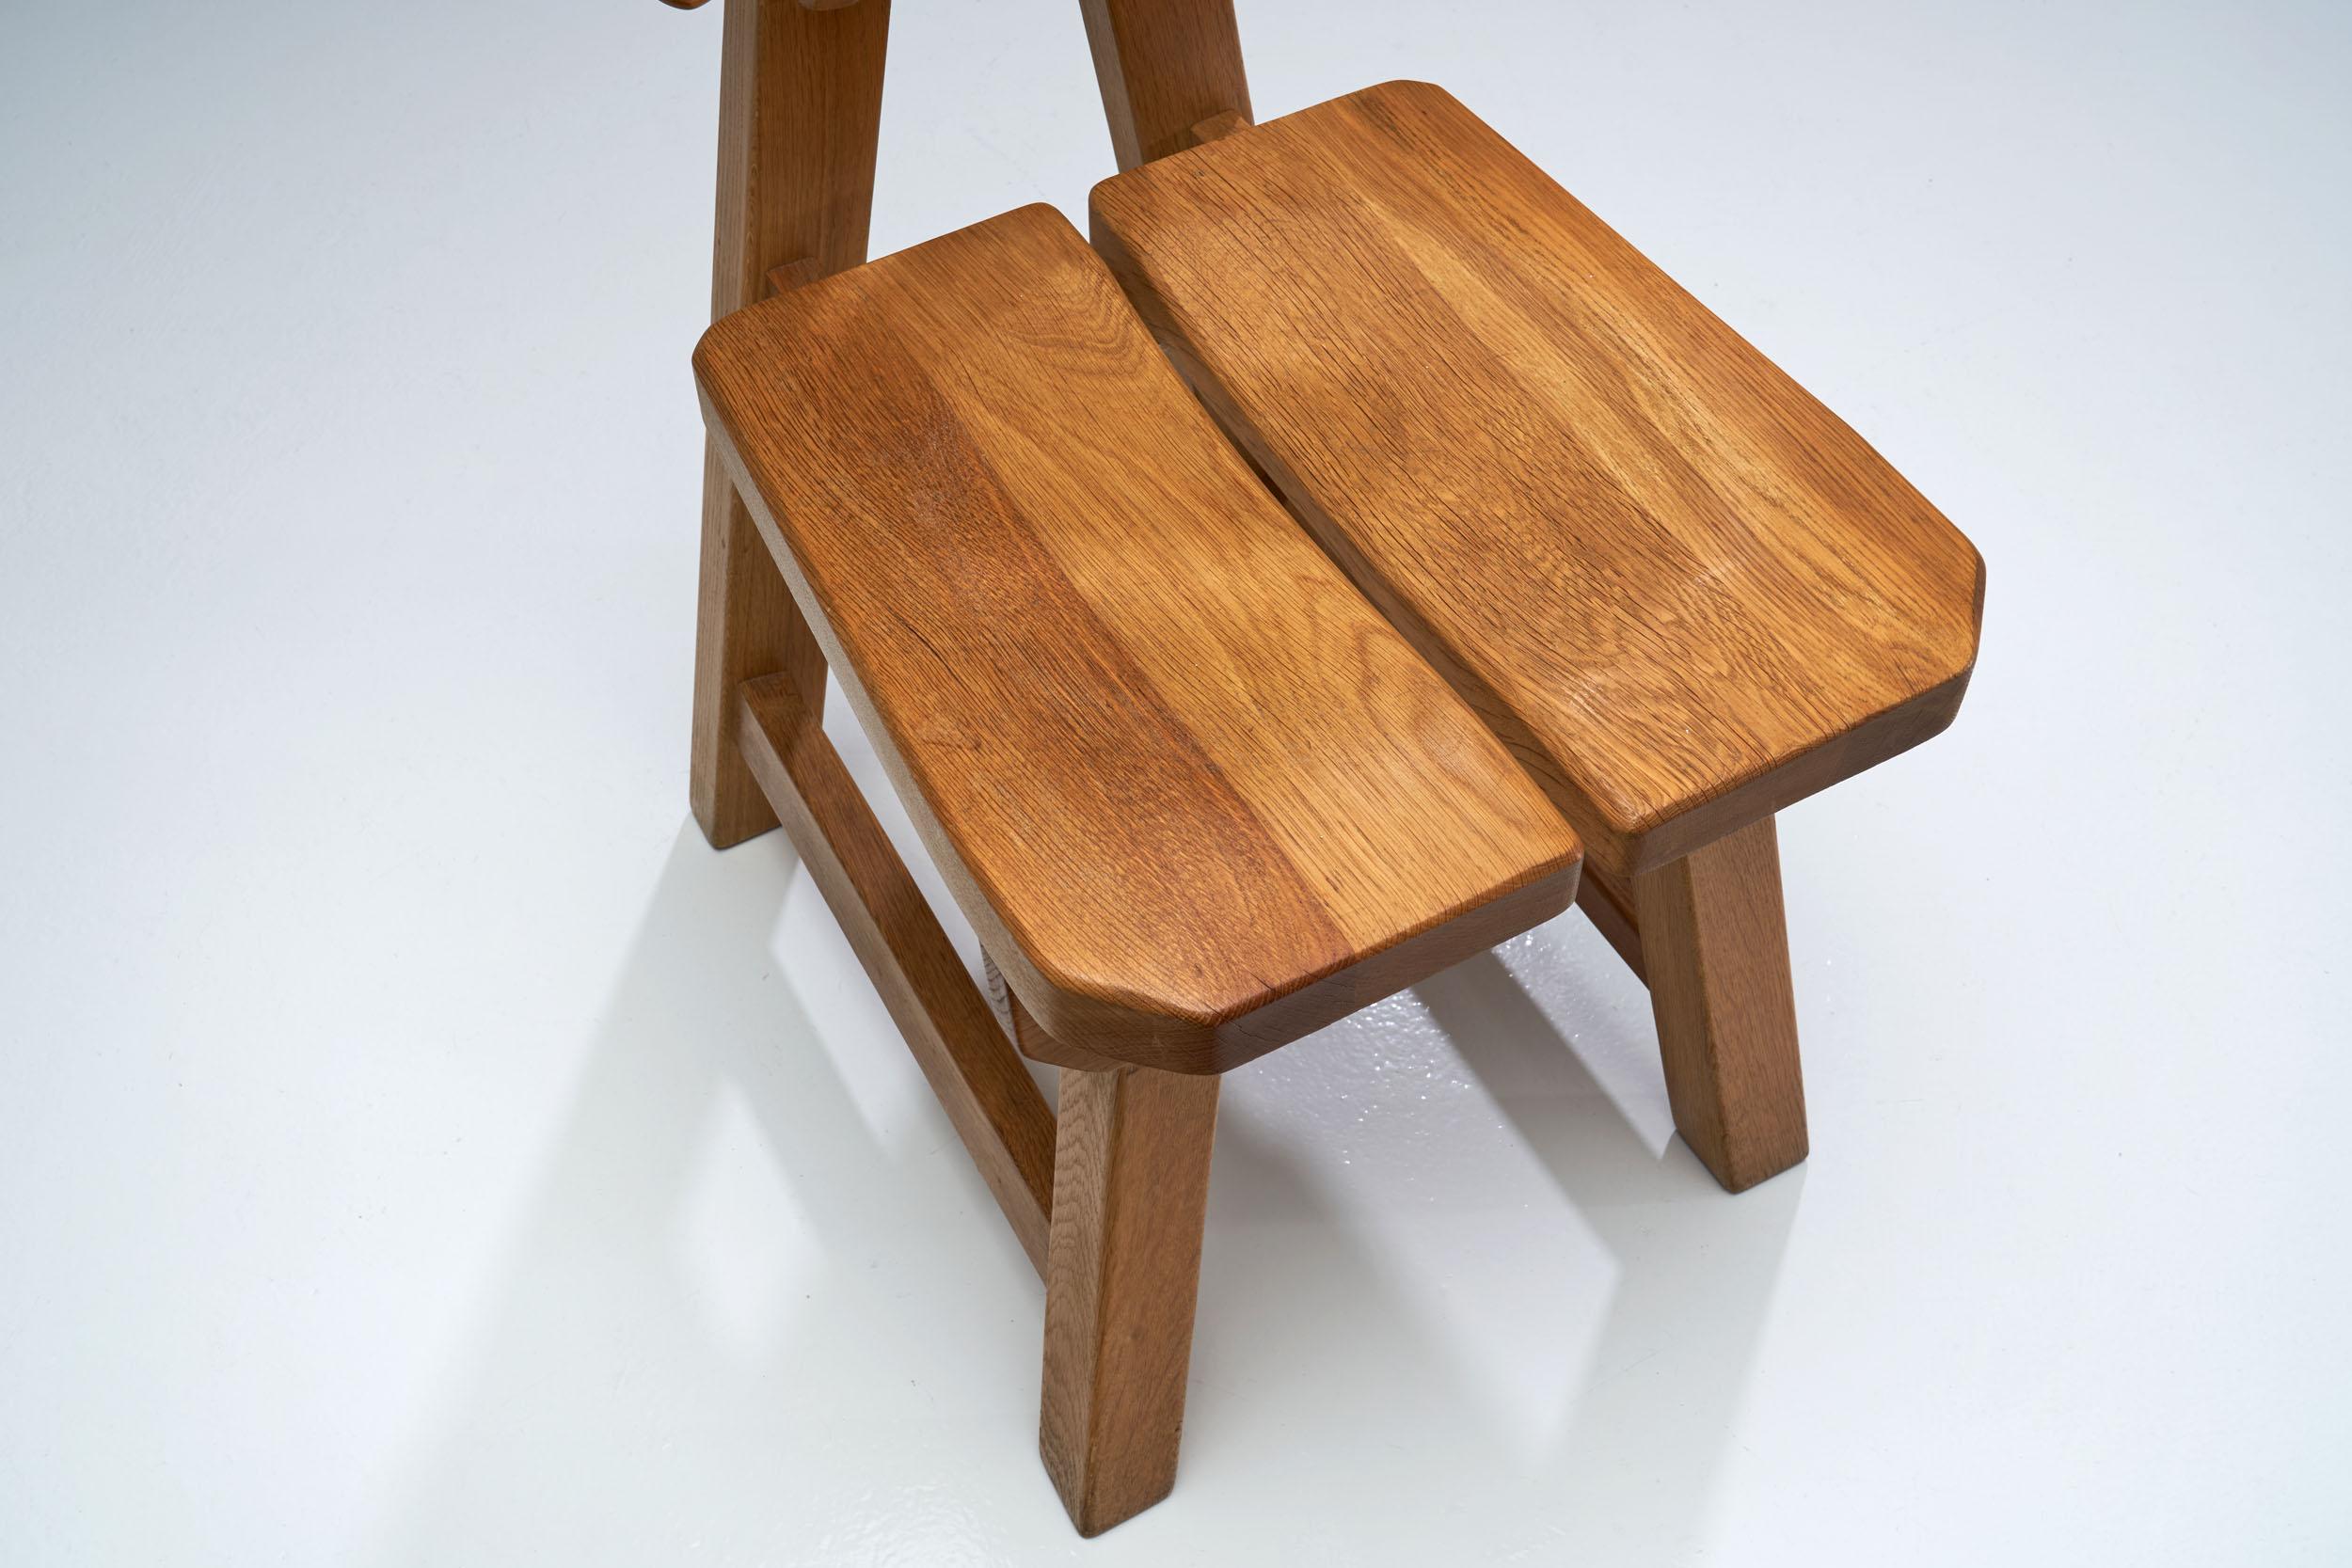 Set of 6 Brutalist Chairs in Solid Oak, Spain 1970s For Sale 4